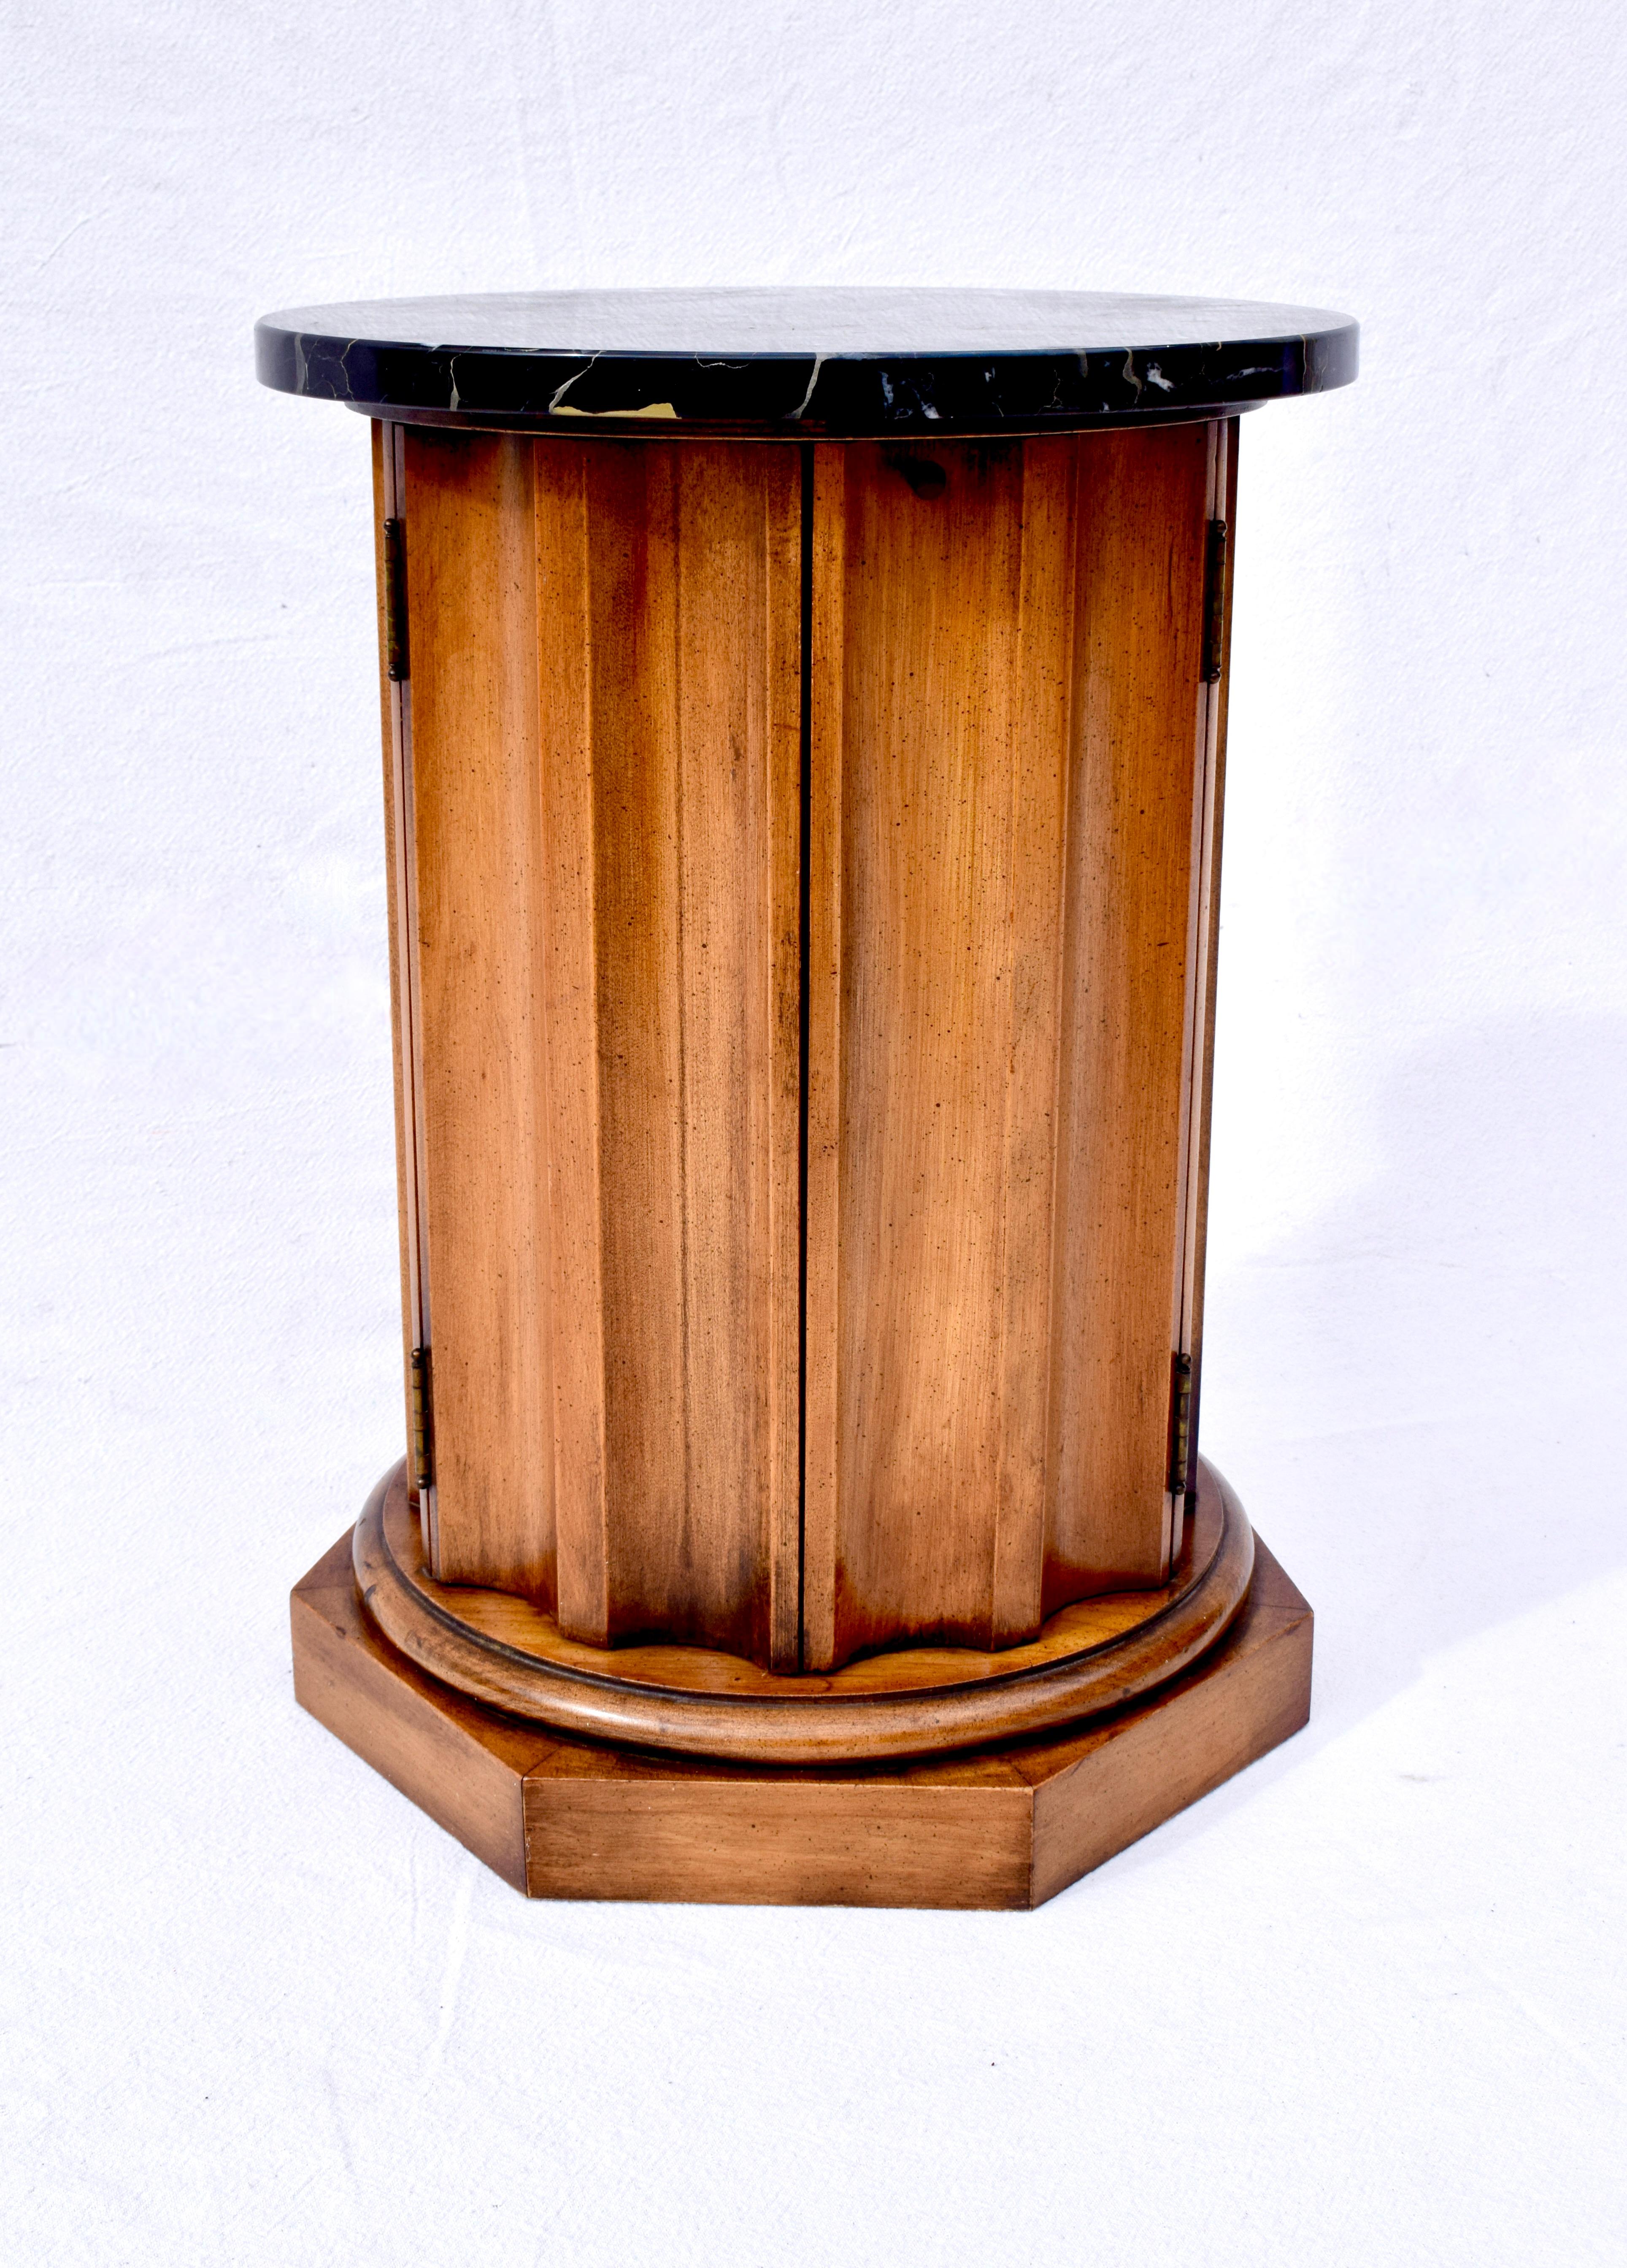 Vintage Italian classical fluted column pedestal style side table with two door cabinet, single removable shelf and striking black Portoro marble top. Suitable for use as a small bar cabinet.